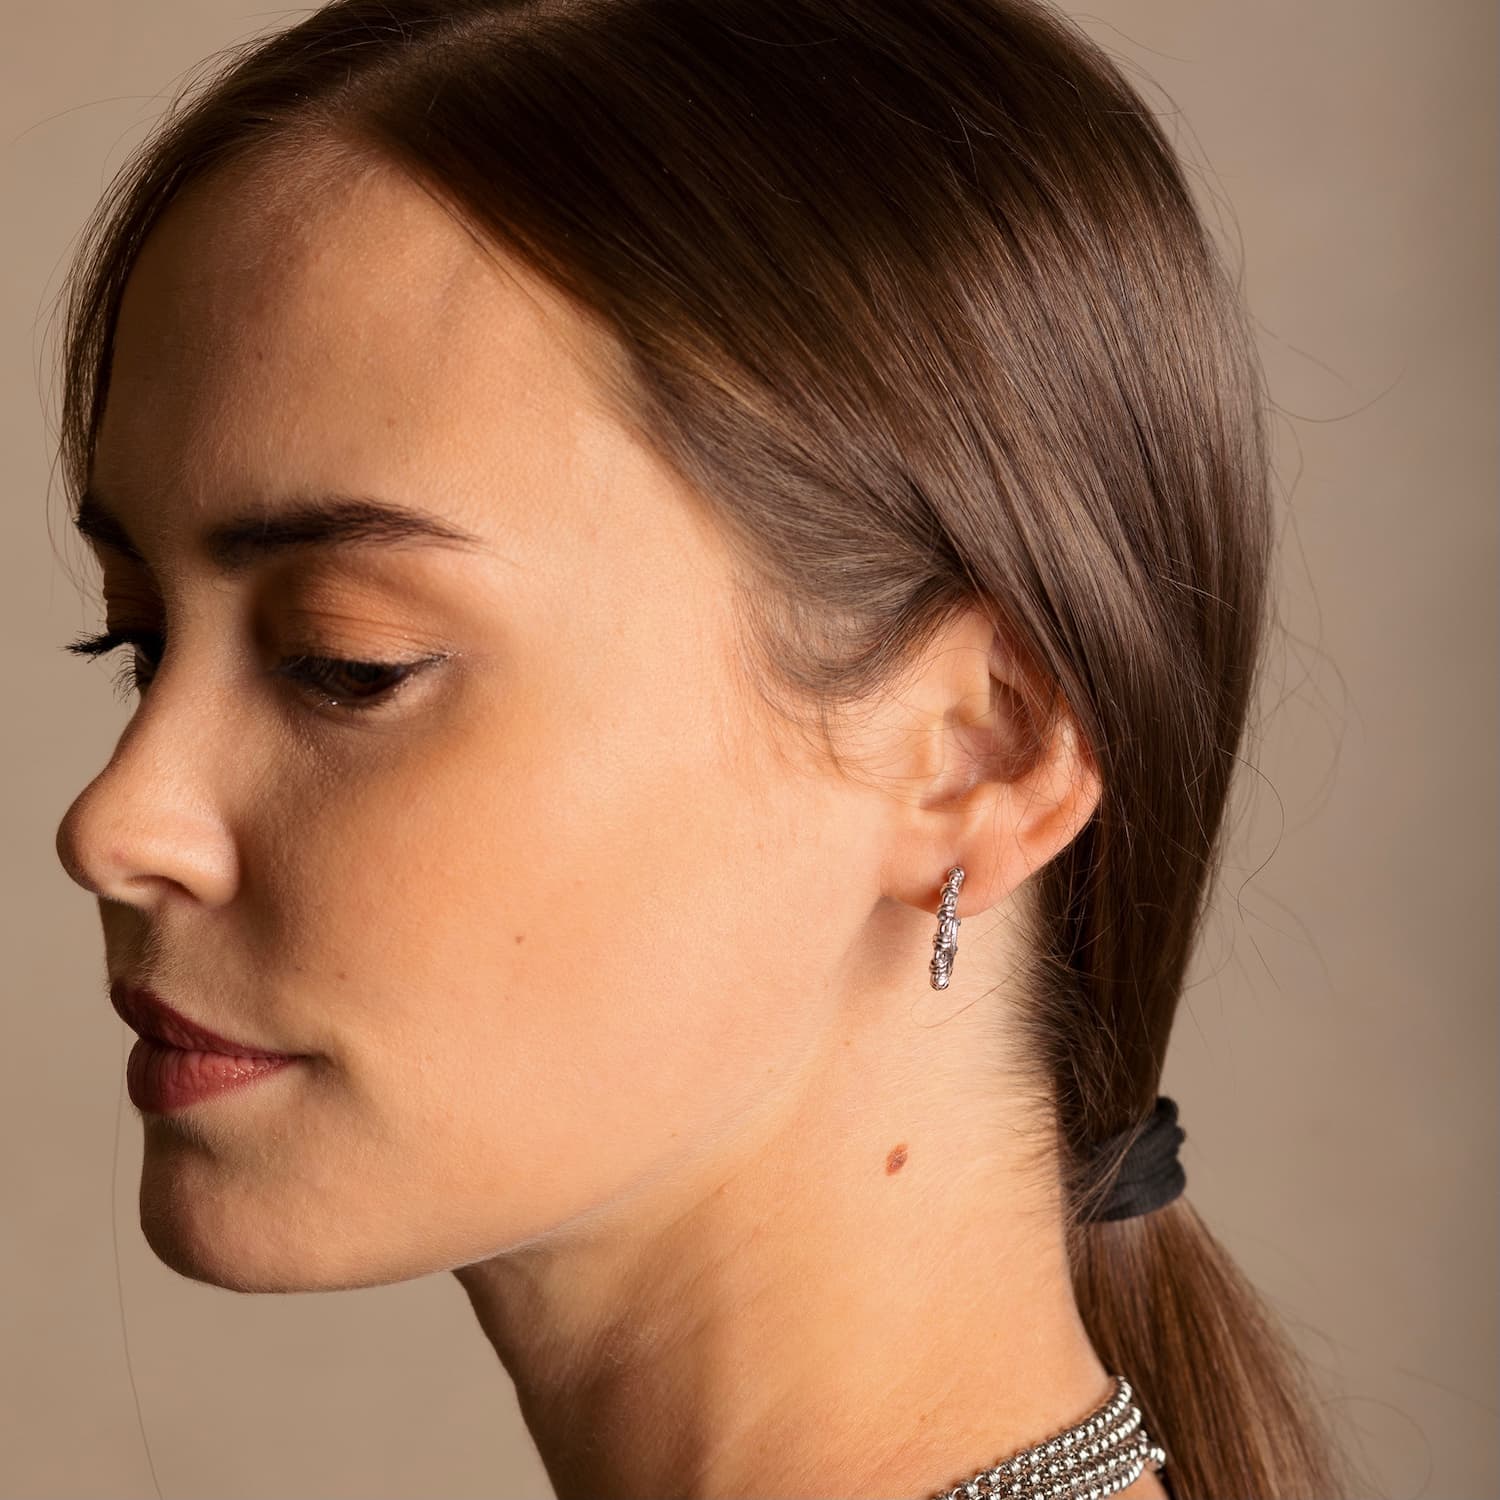 A model with dark hair wearing silver hoop earrings designed and hand-crafted by DelBrenna Italian Jewelers in Tuscany. The earrings and necklace shown here are designed based on the iconic Links collection of DelBrenna silver chains, necklaces, rings, and bracelets. 